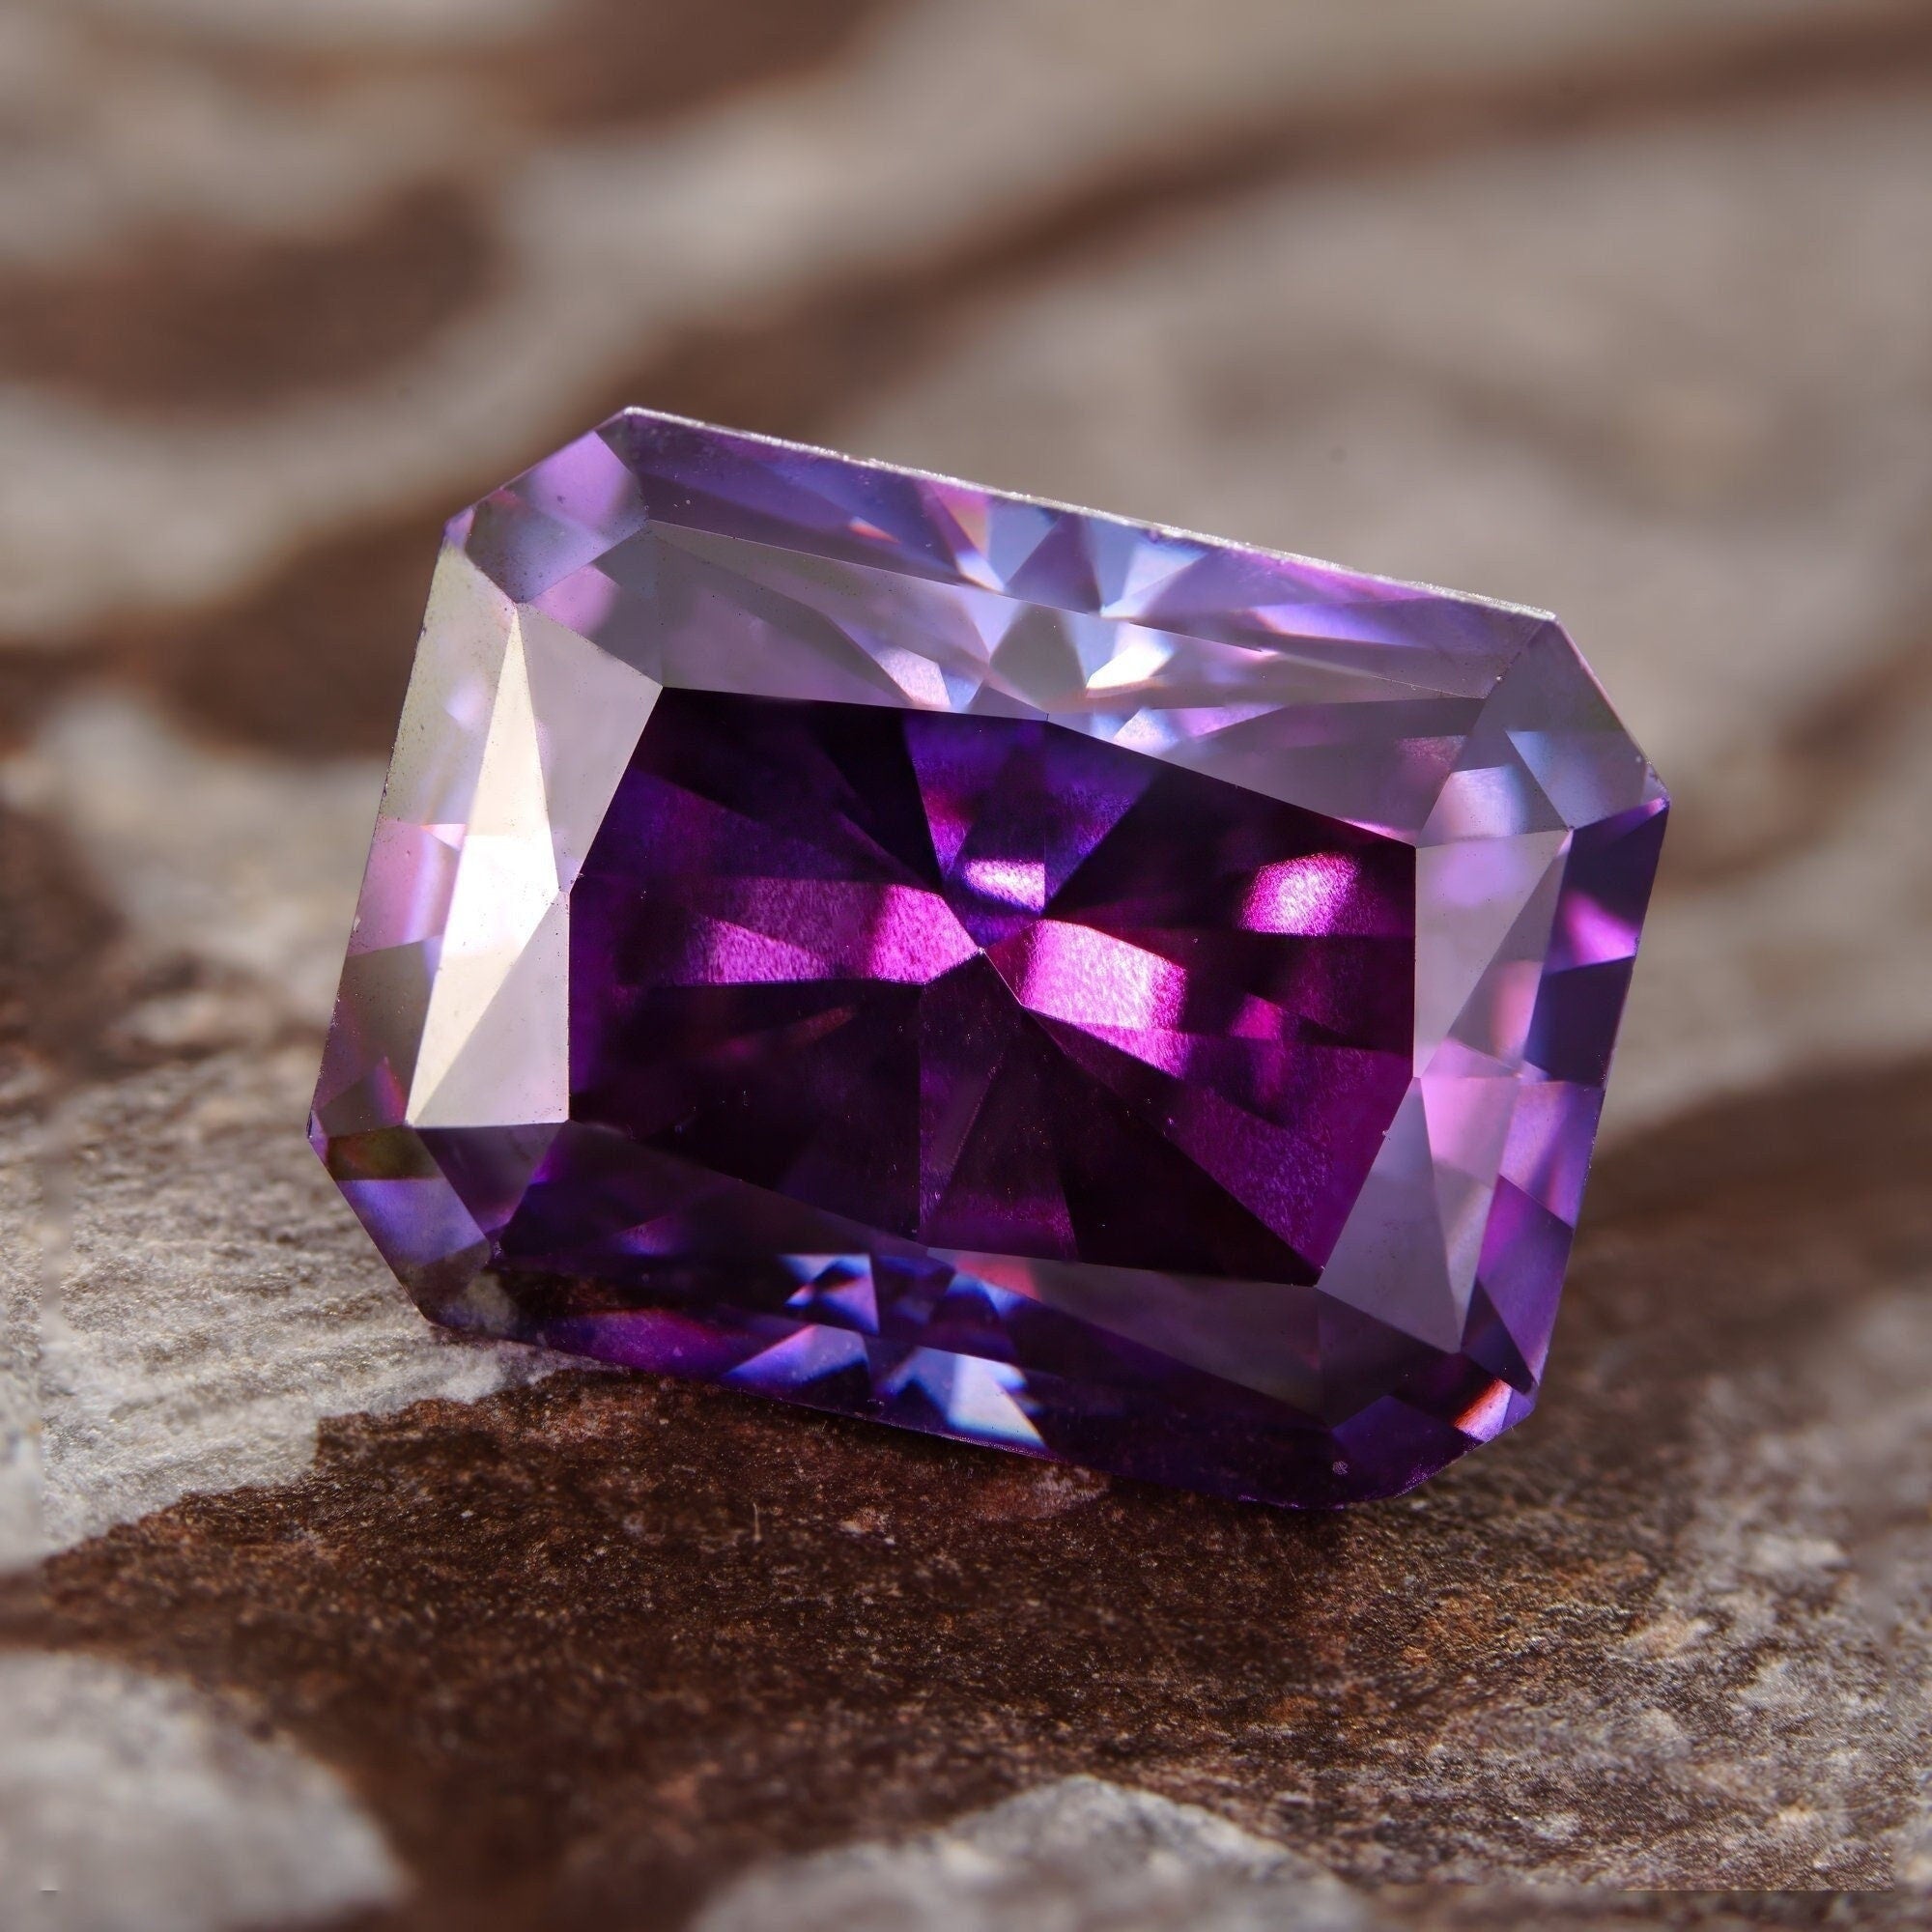 Radiant cut loose purple moissanite certified vvs1 gra imperial purple colored moissanite beads